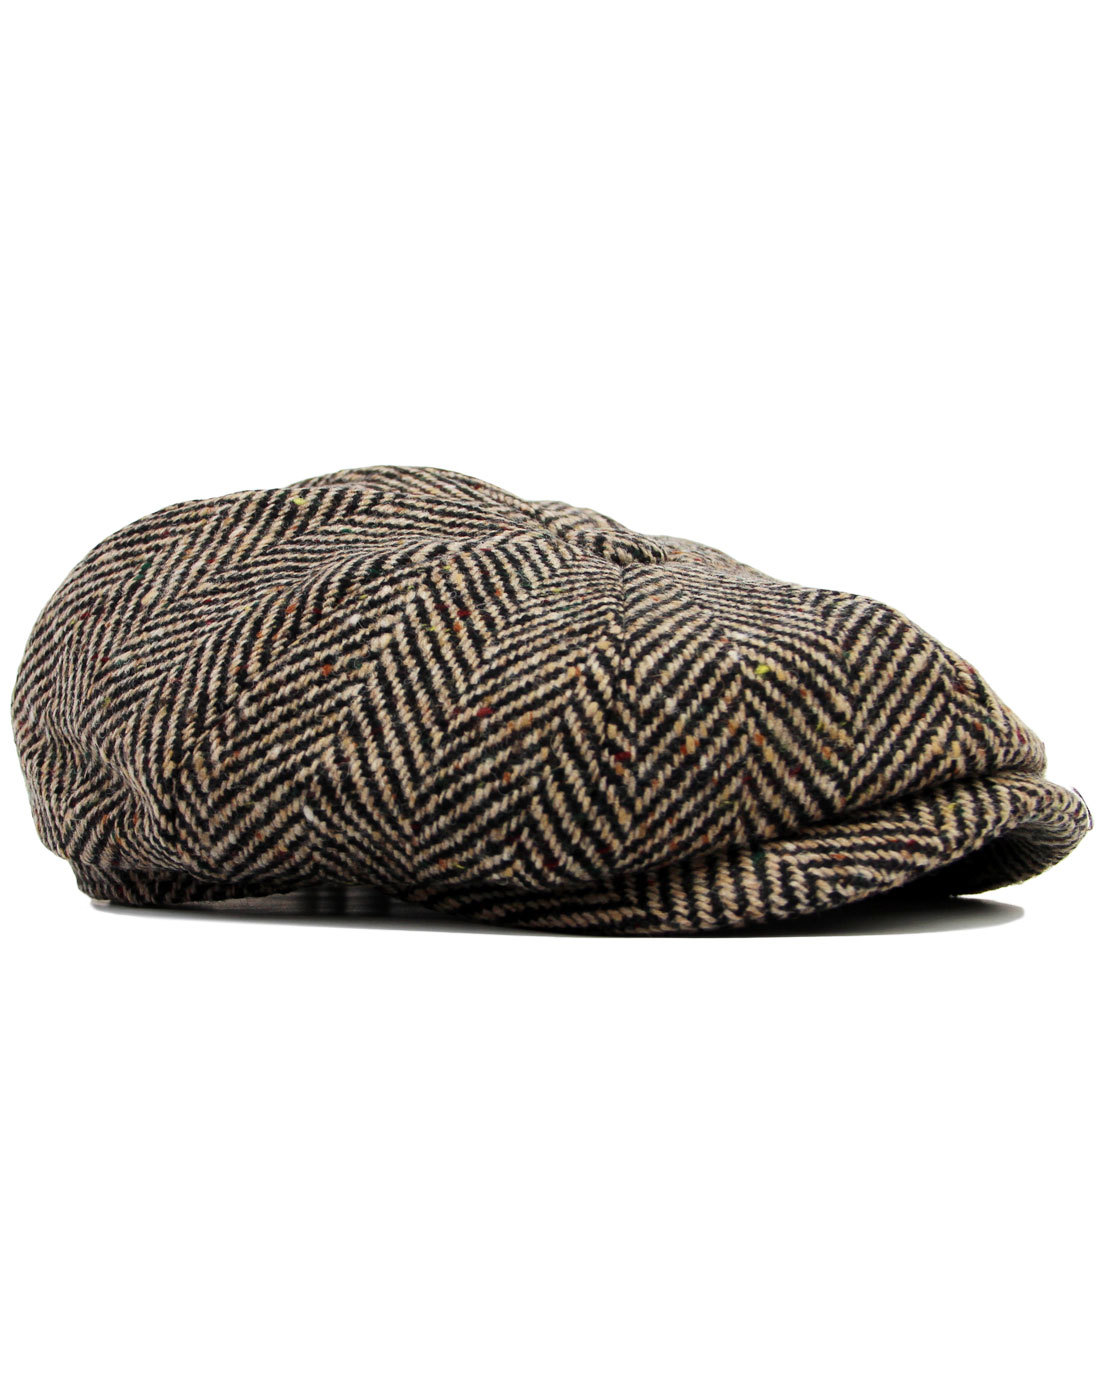 Donegal Mayo FAILSWORTH Mod Magee Wool Gatsby Cap